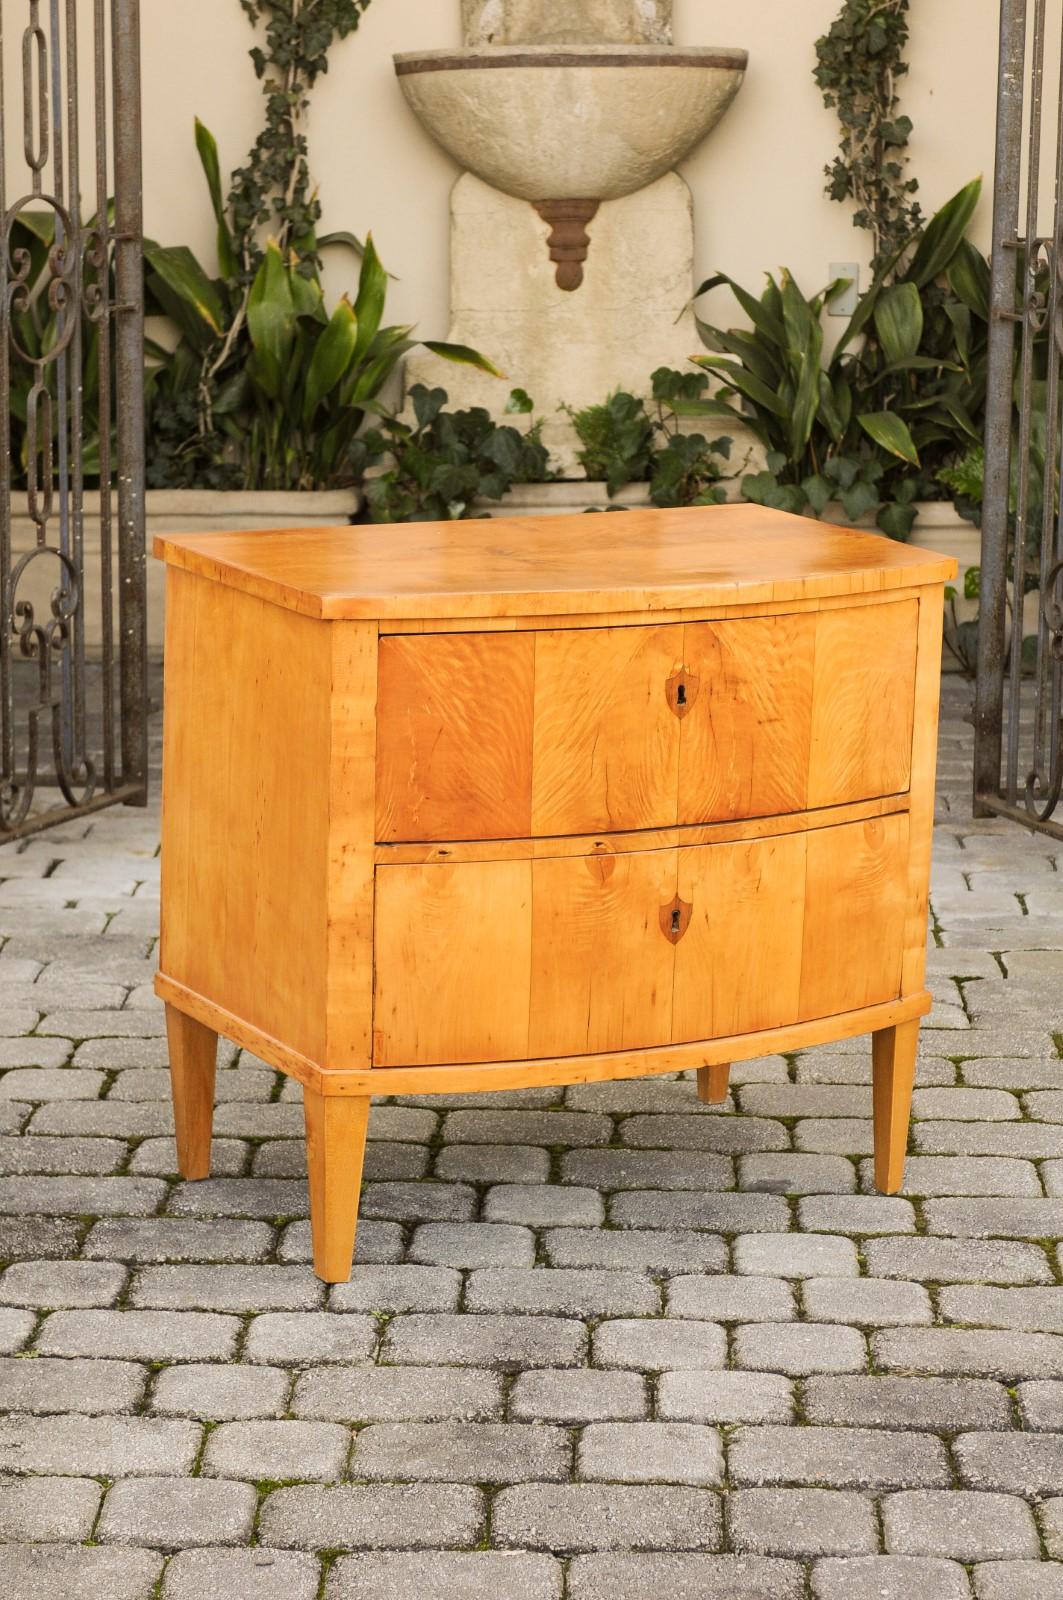 An Austrian Biedermeier two-drawer commode from the late 19th century, with bow front and tapered feet. Born in Imperial Austria during the third quarter of the 19th century, this elegant Biedermeier chest features a rectangular top sitting above a